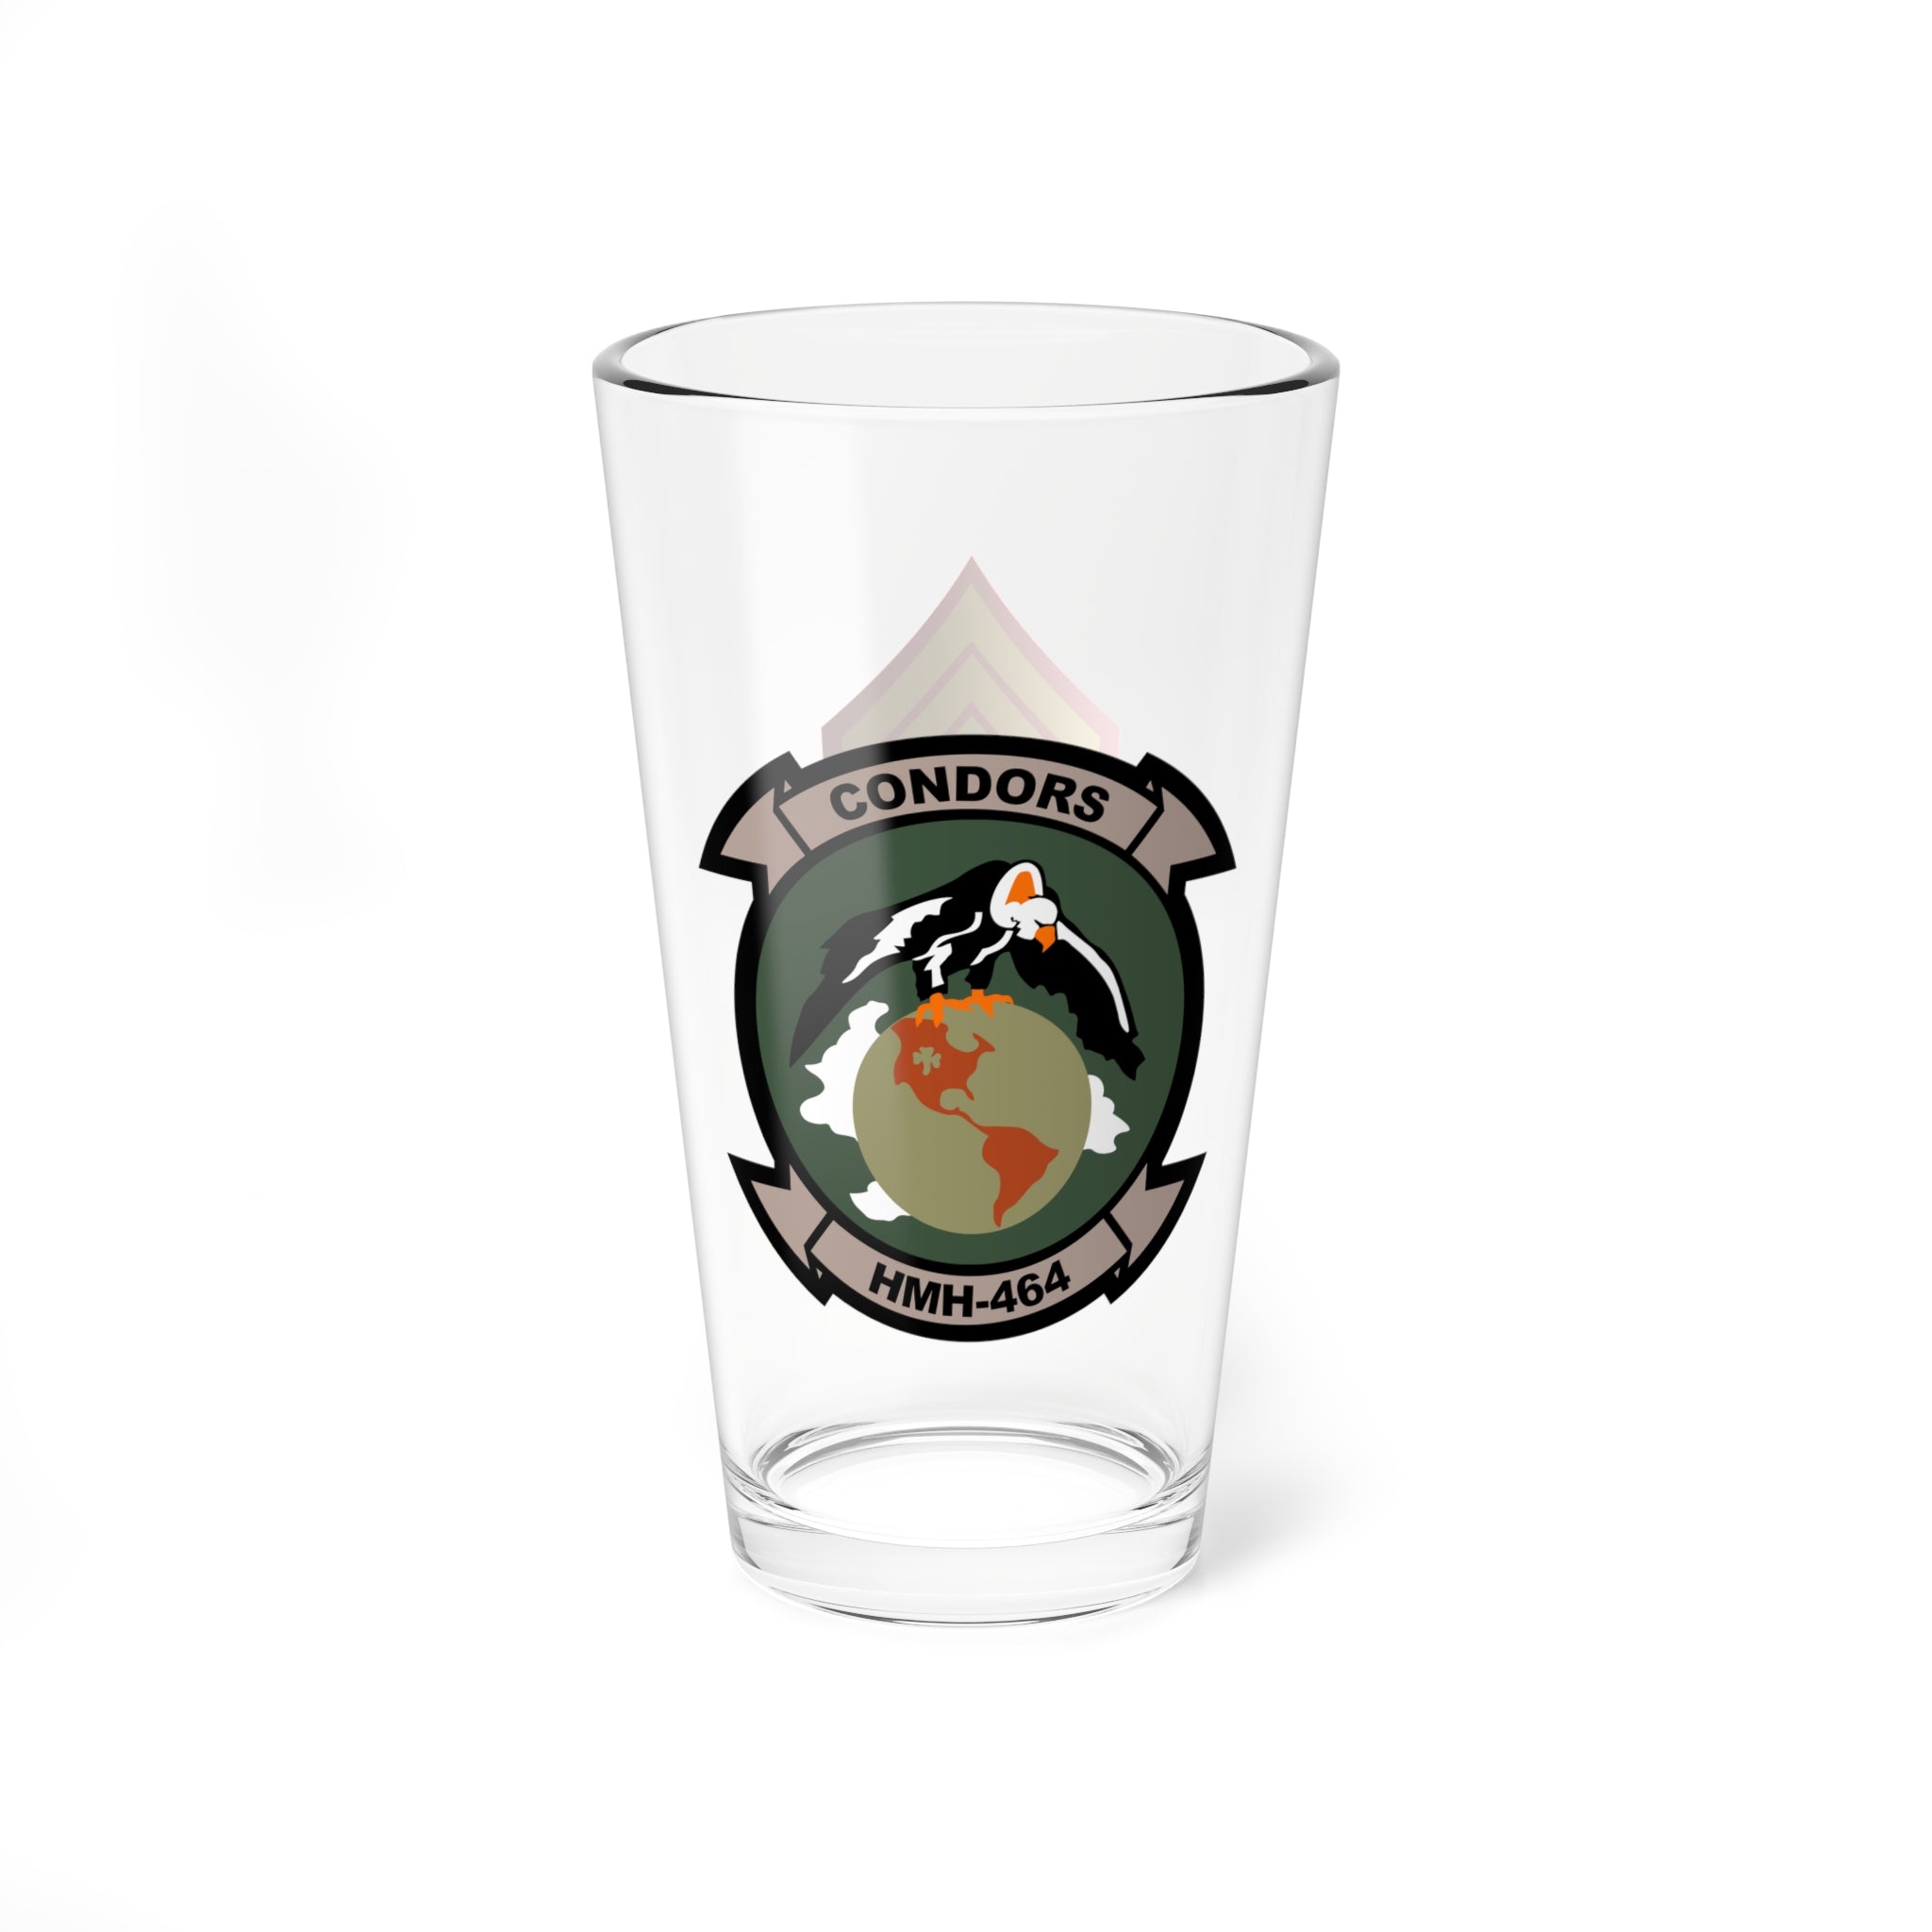 HMH-464 "Condors" 1st SGT Personalized Pint Glass, Marine Heavy Lift Helicopter Squadron fyling the CH-53E Super Stallion